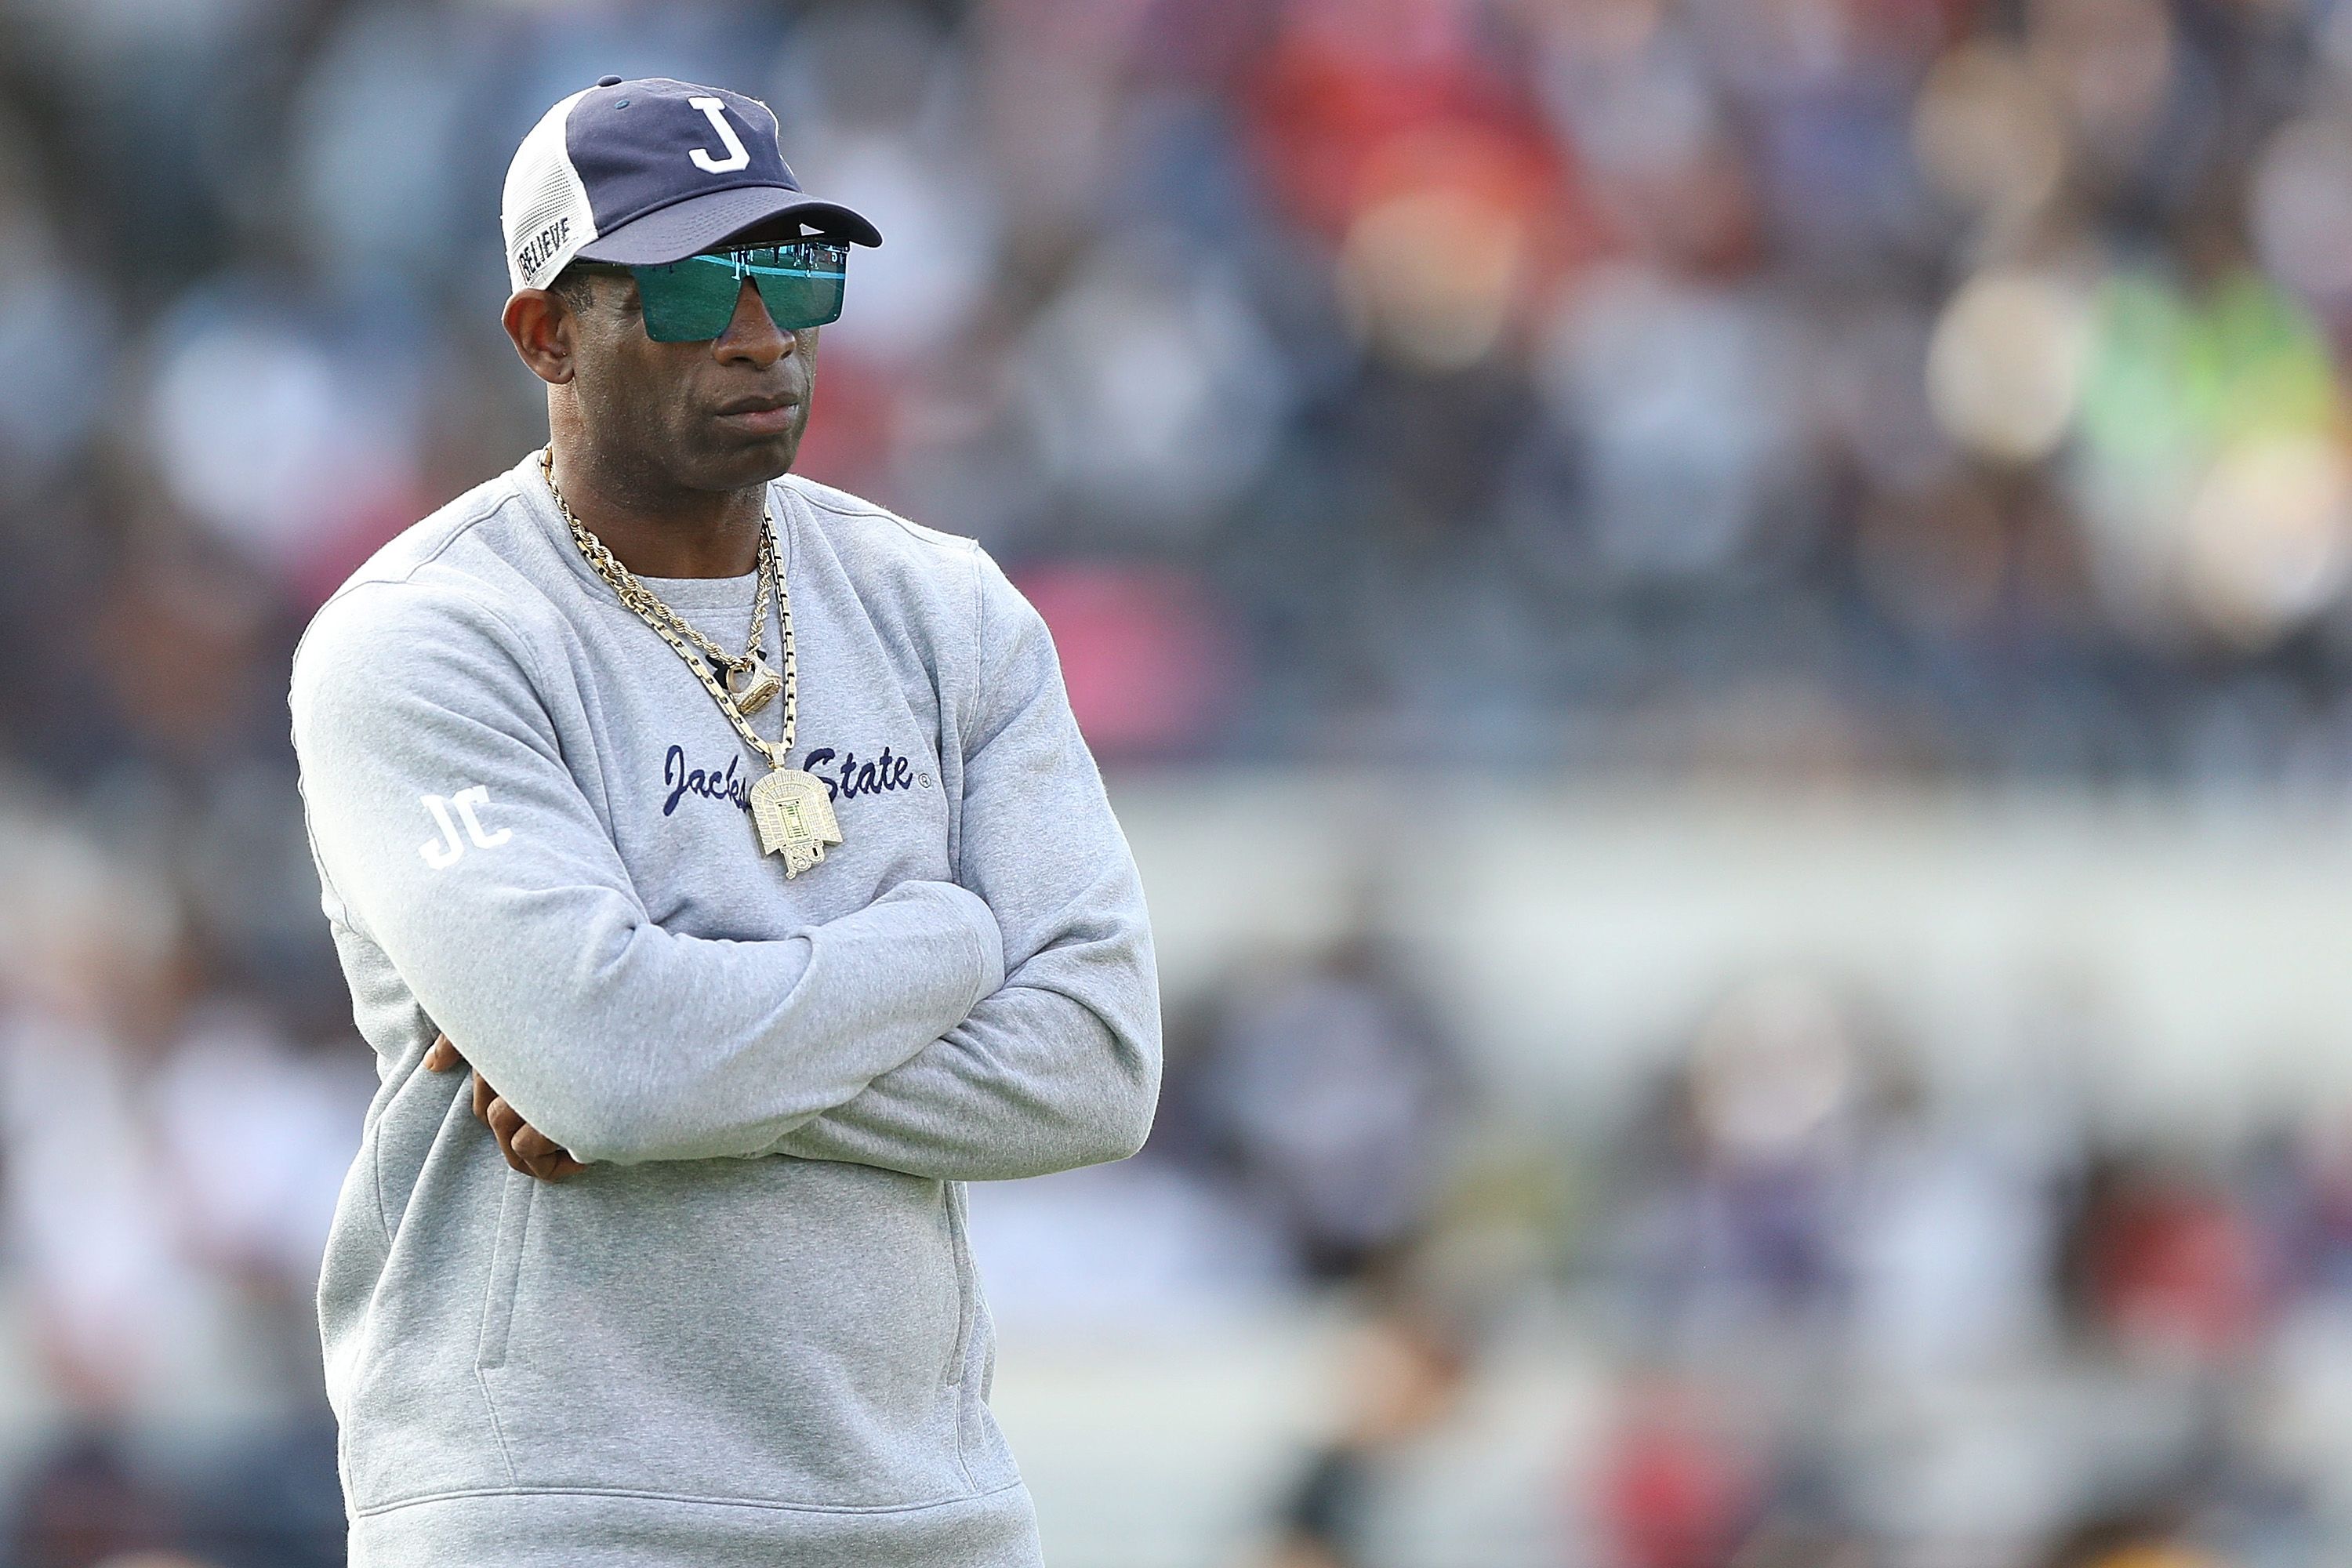 Deion Sanders Is Leading Jackson State to a Football Title Game